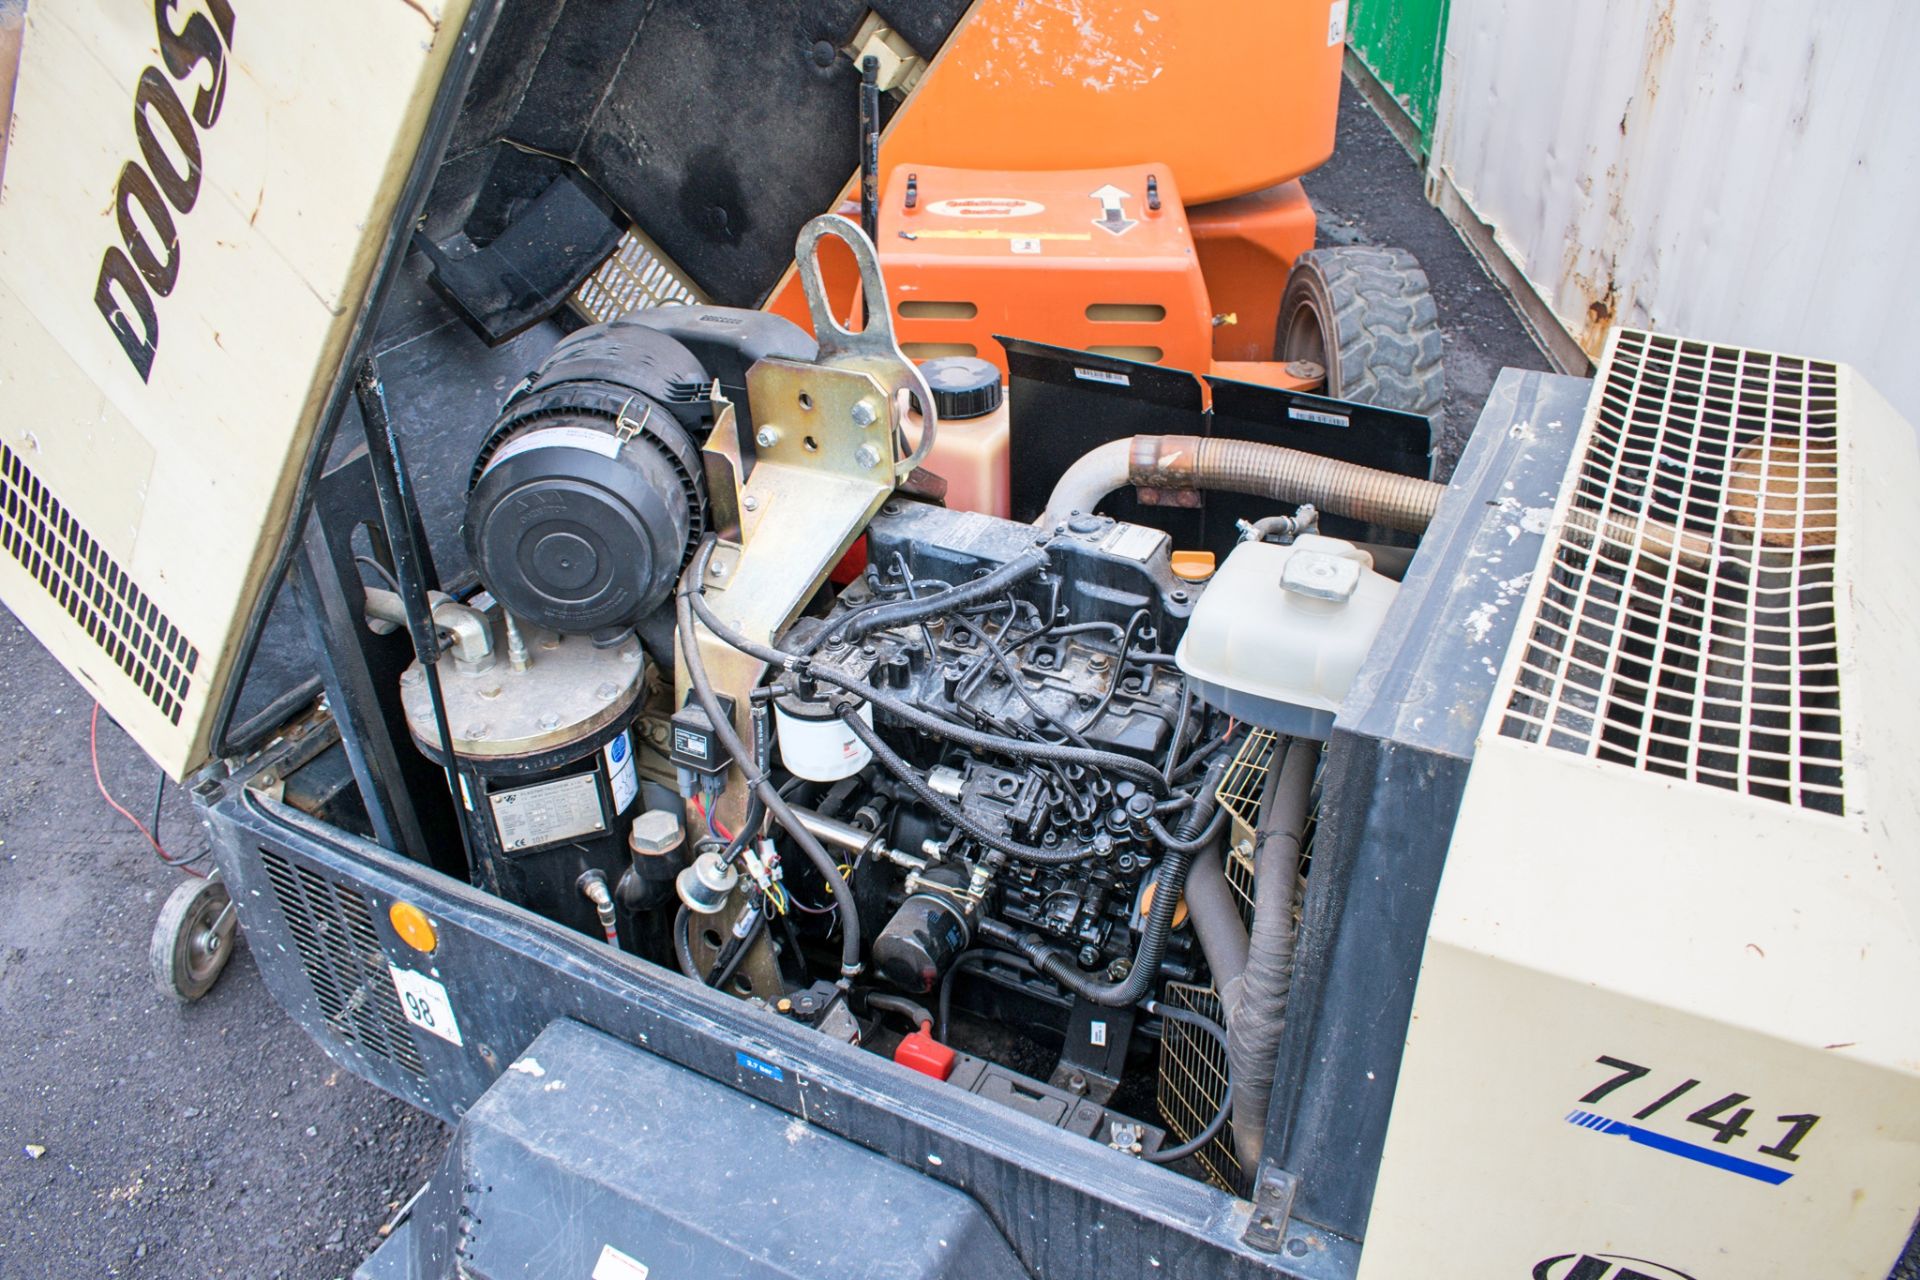 Doosan 741 diesel driven mobile air compressor  Year: 2012 S/N: 431380 Recorded Hours: 601 A577261 - Image 4 of 4